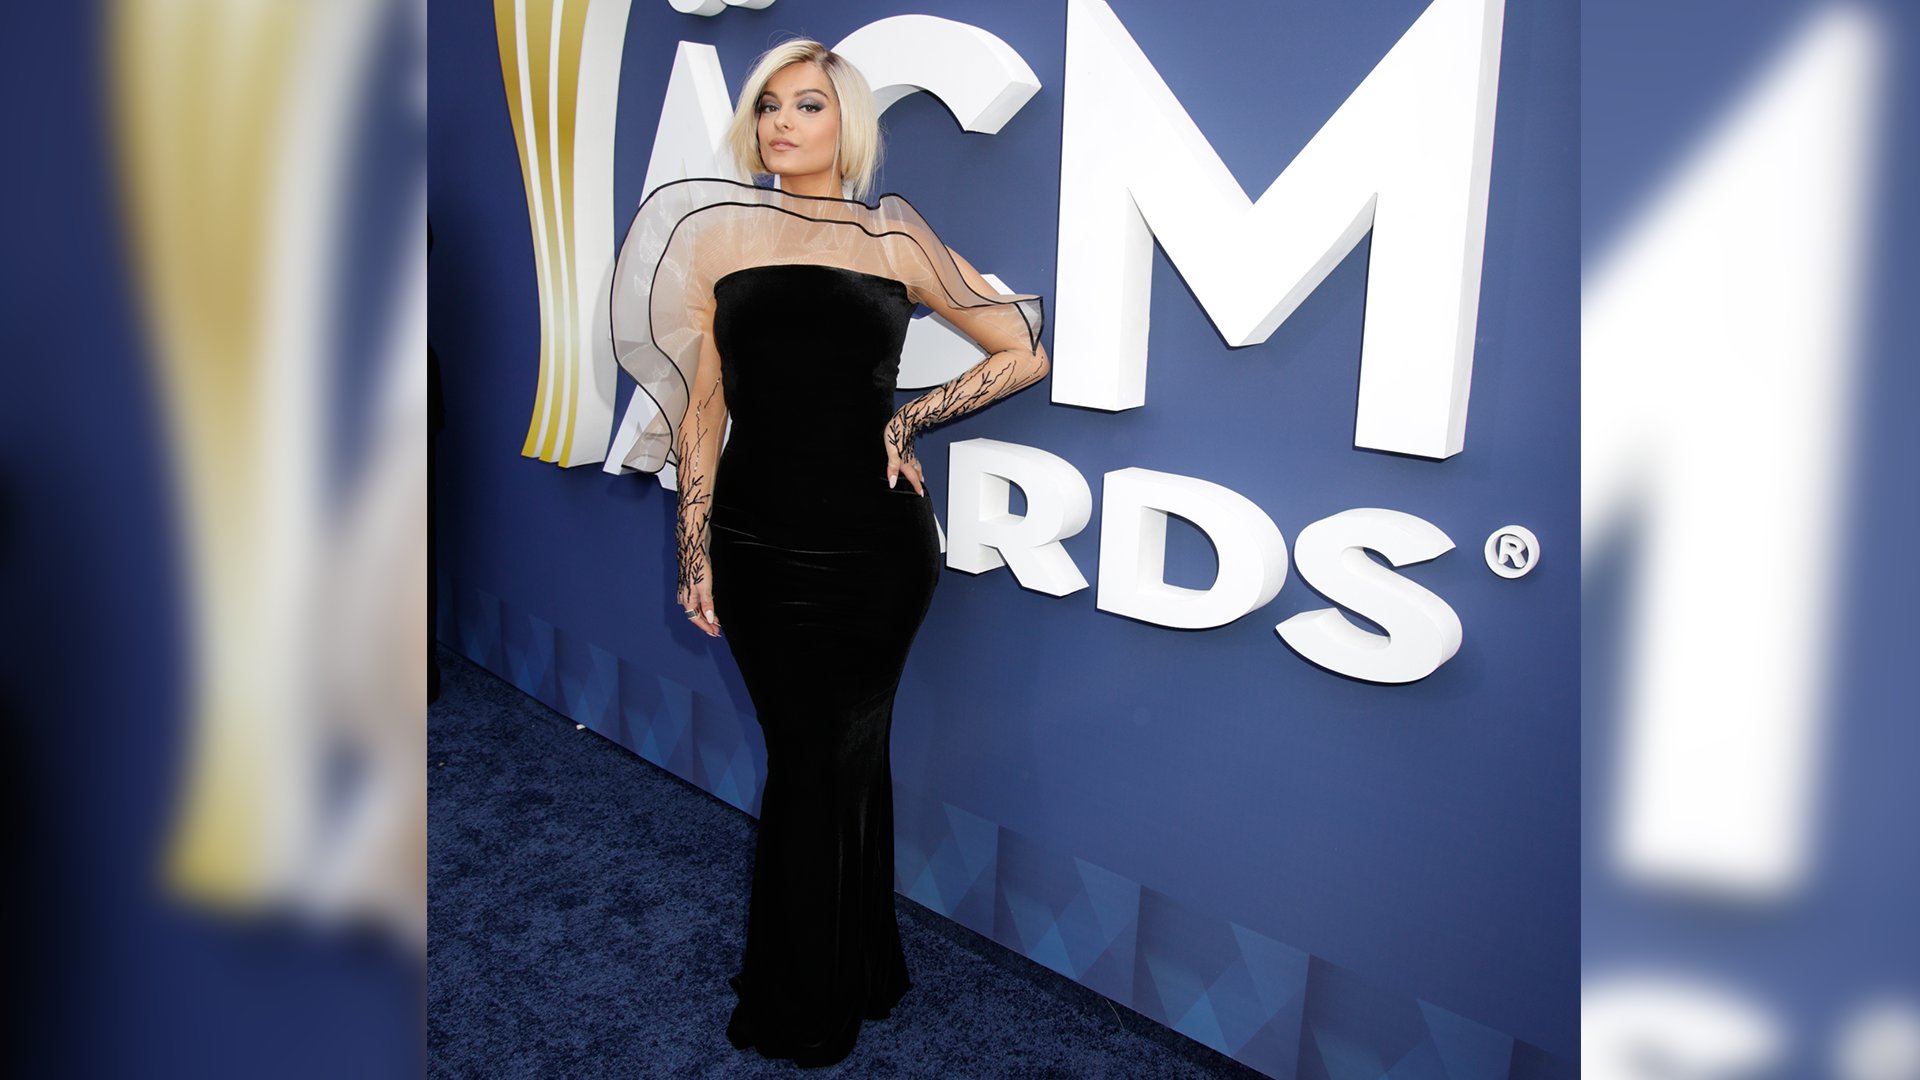 Pop singer Bebe Rexha knows how to make a statement while posing on the ACM red carpet.